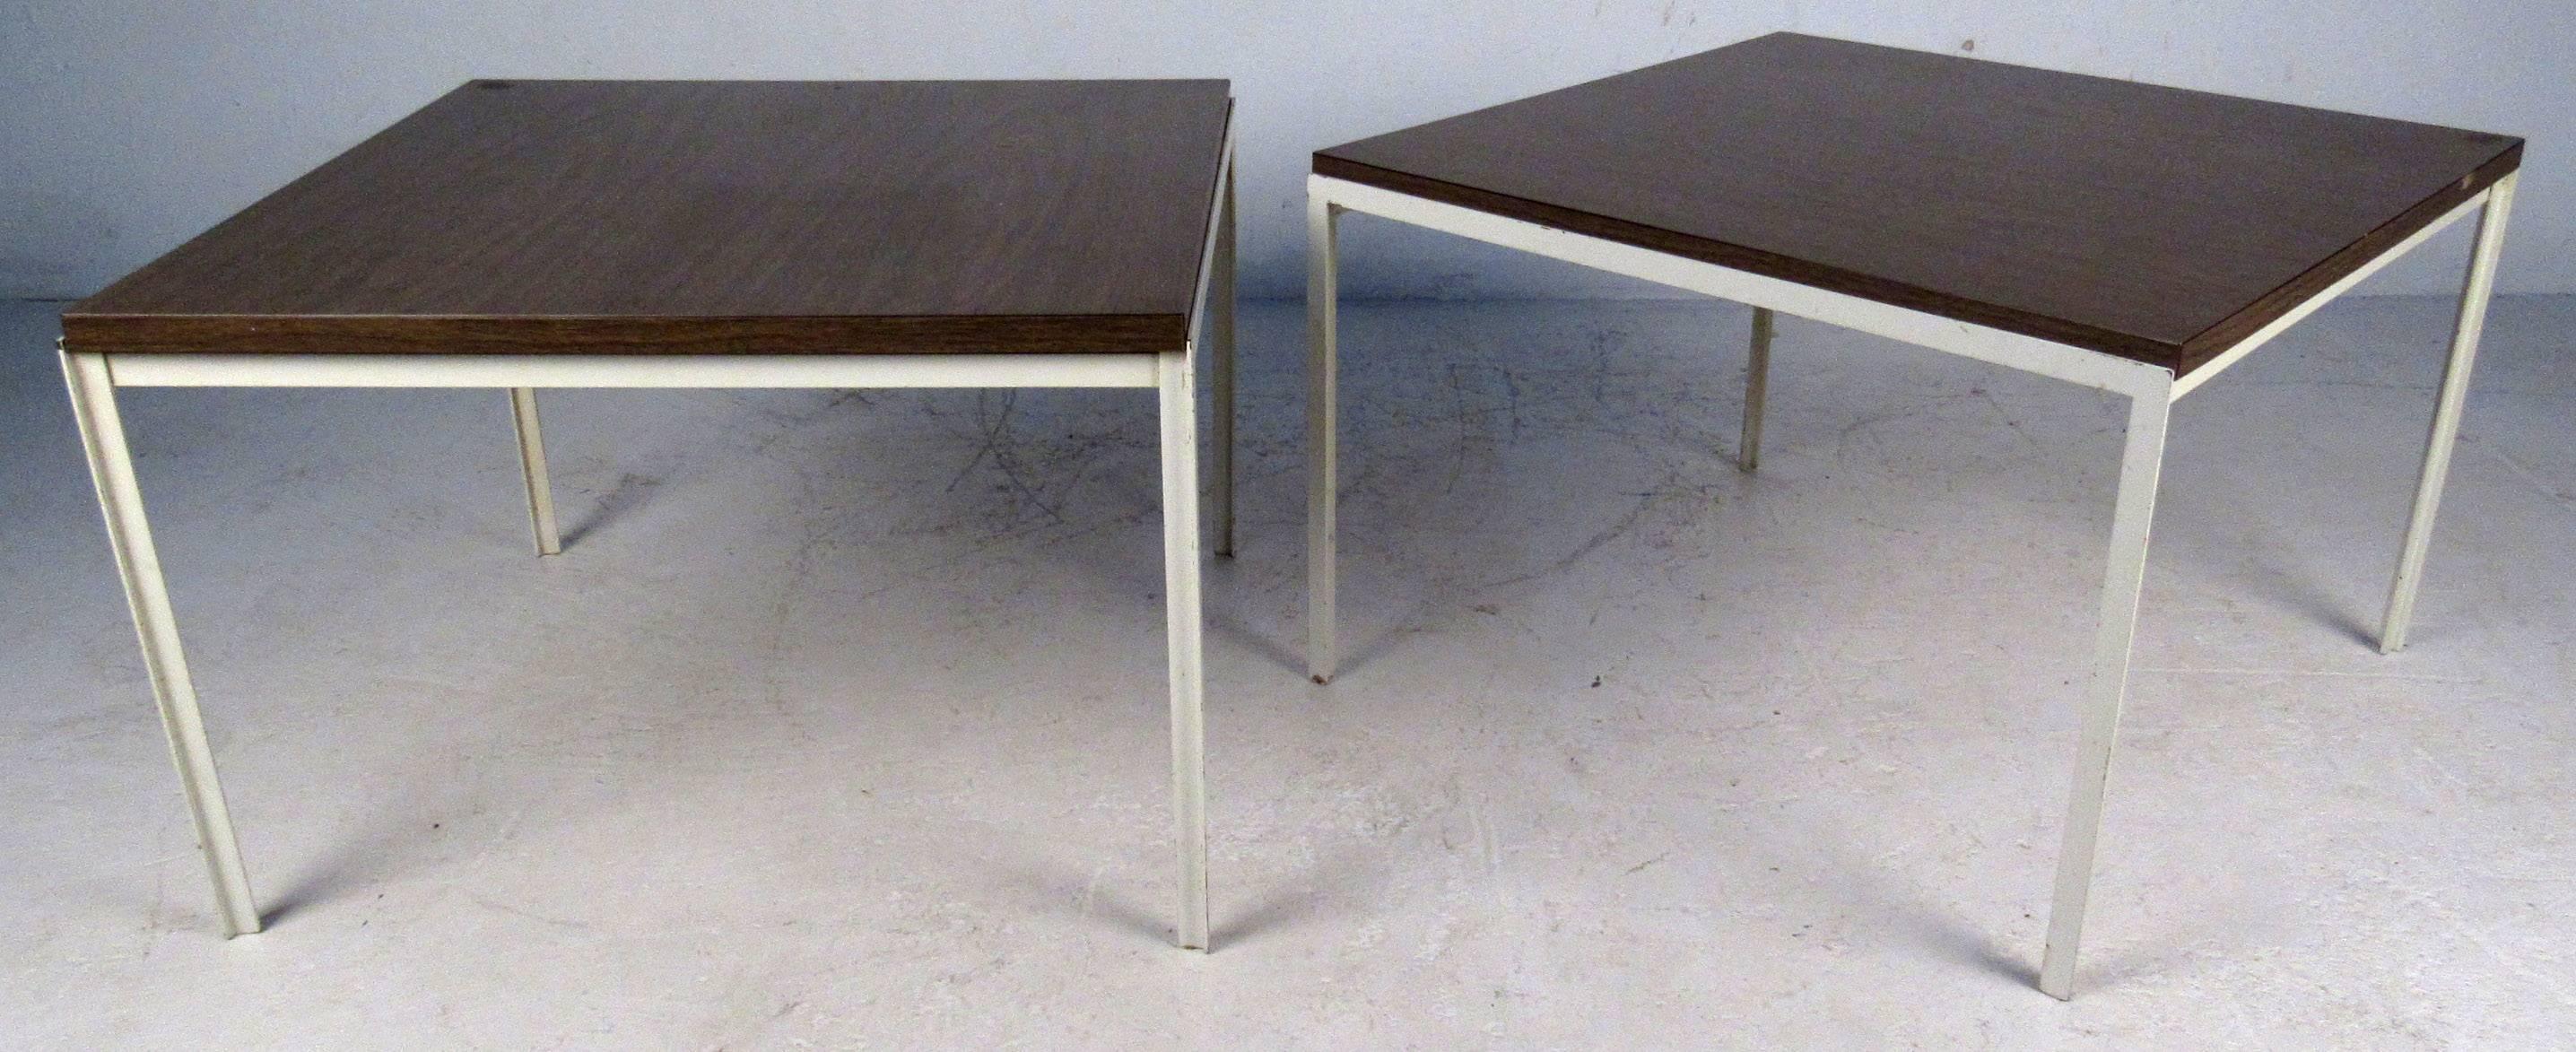 Pair of Low Mid-Century Side Tables By Knoll In Good Condition For Sale In Brooklyn, NY